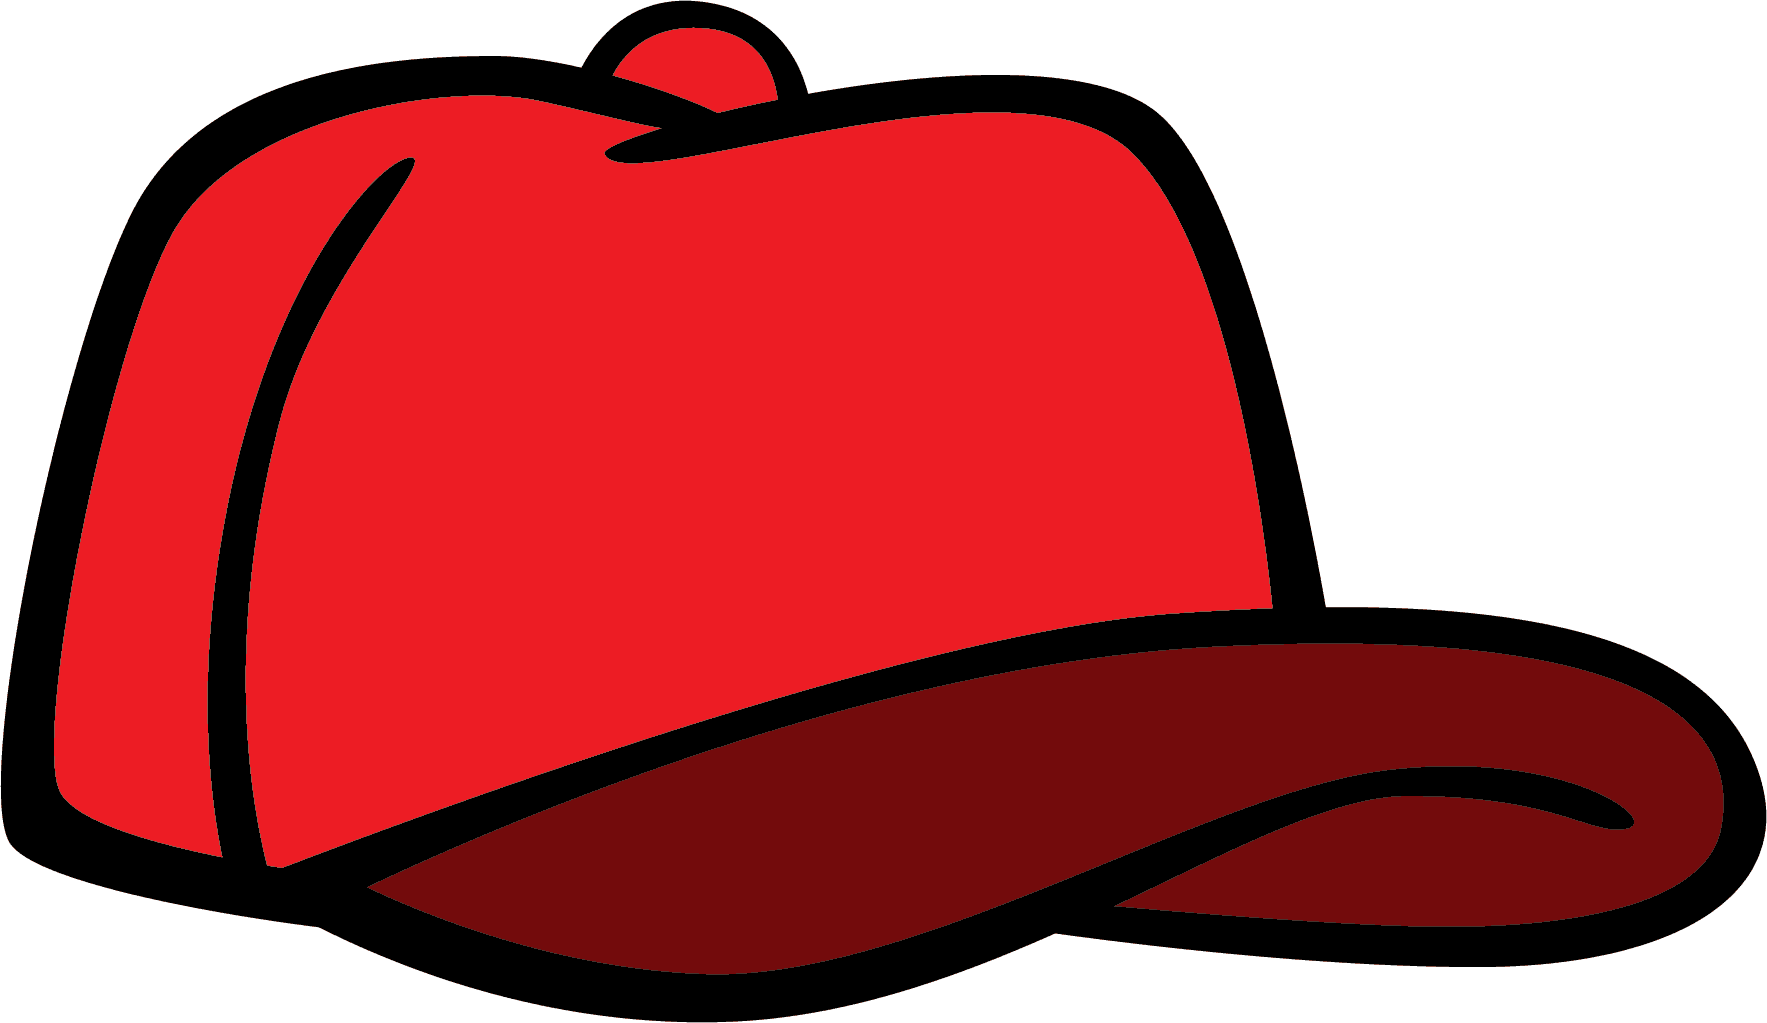 Baseball hat clipart free clipart images